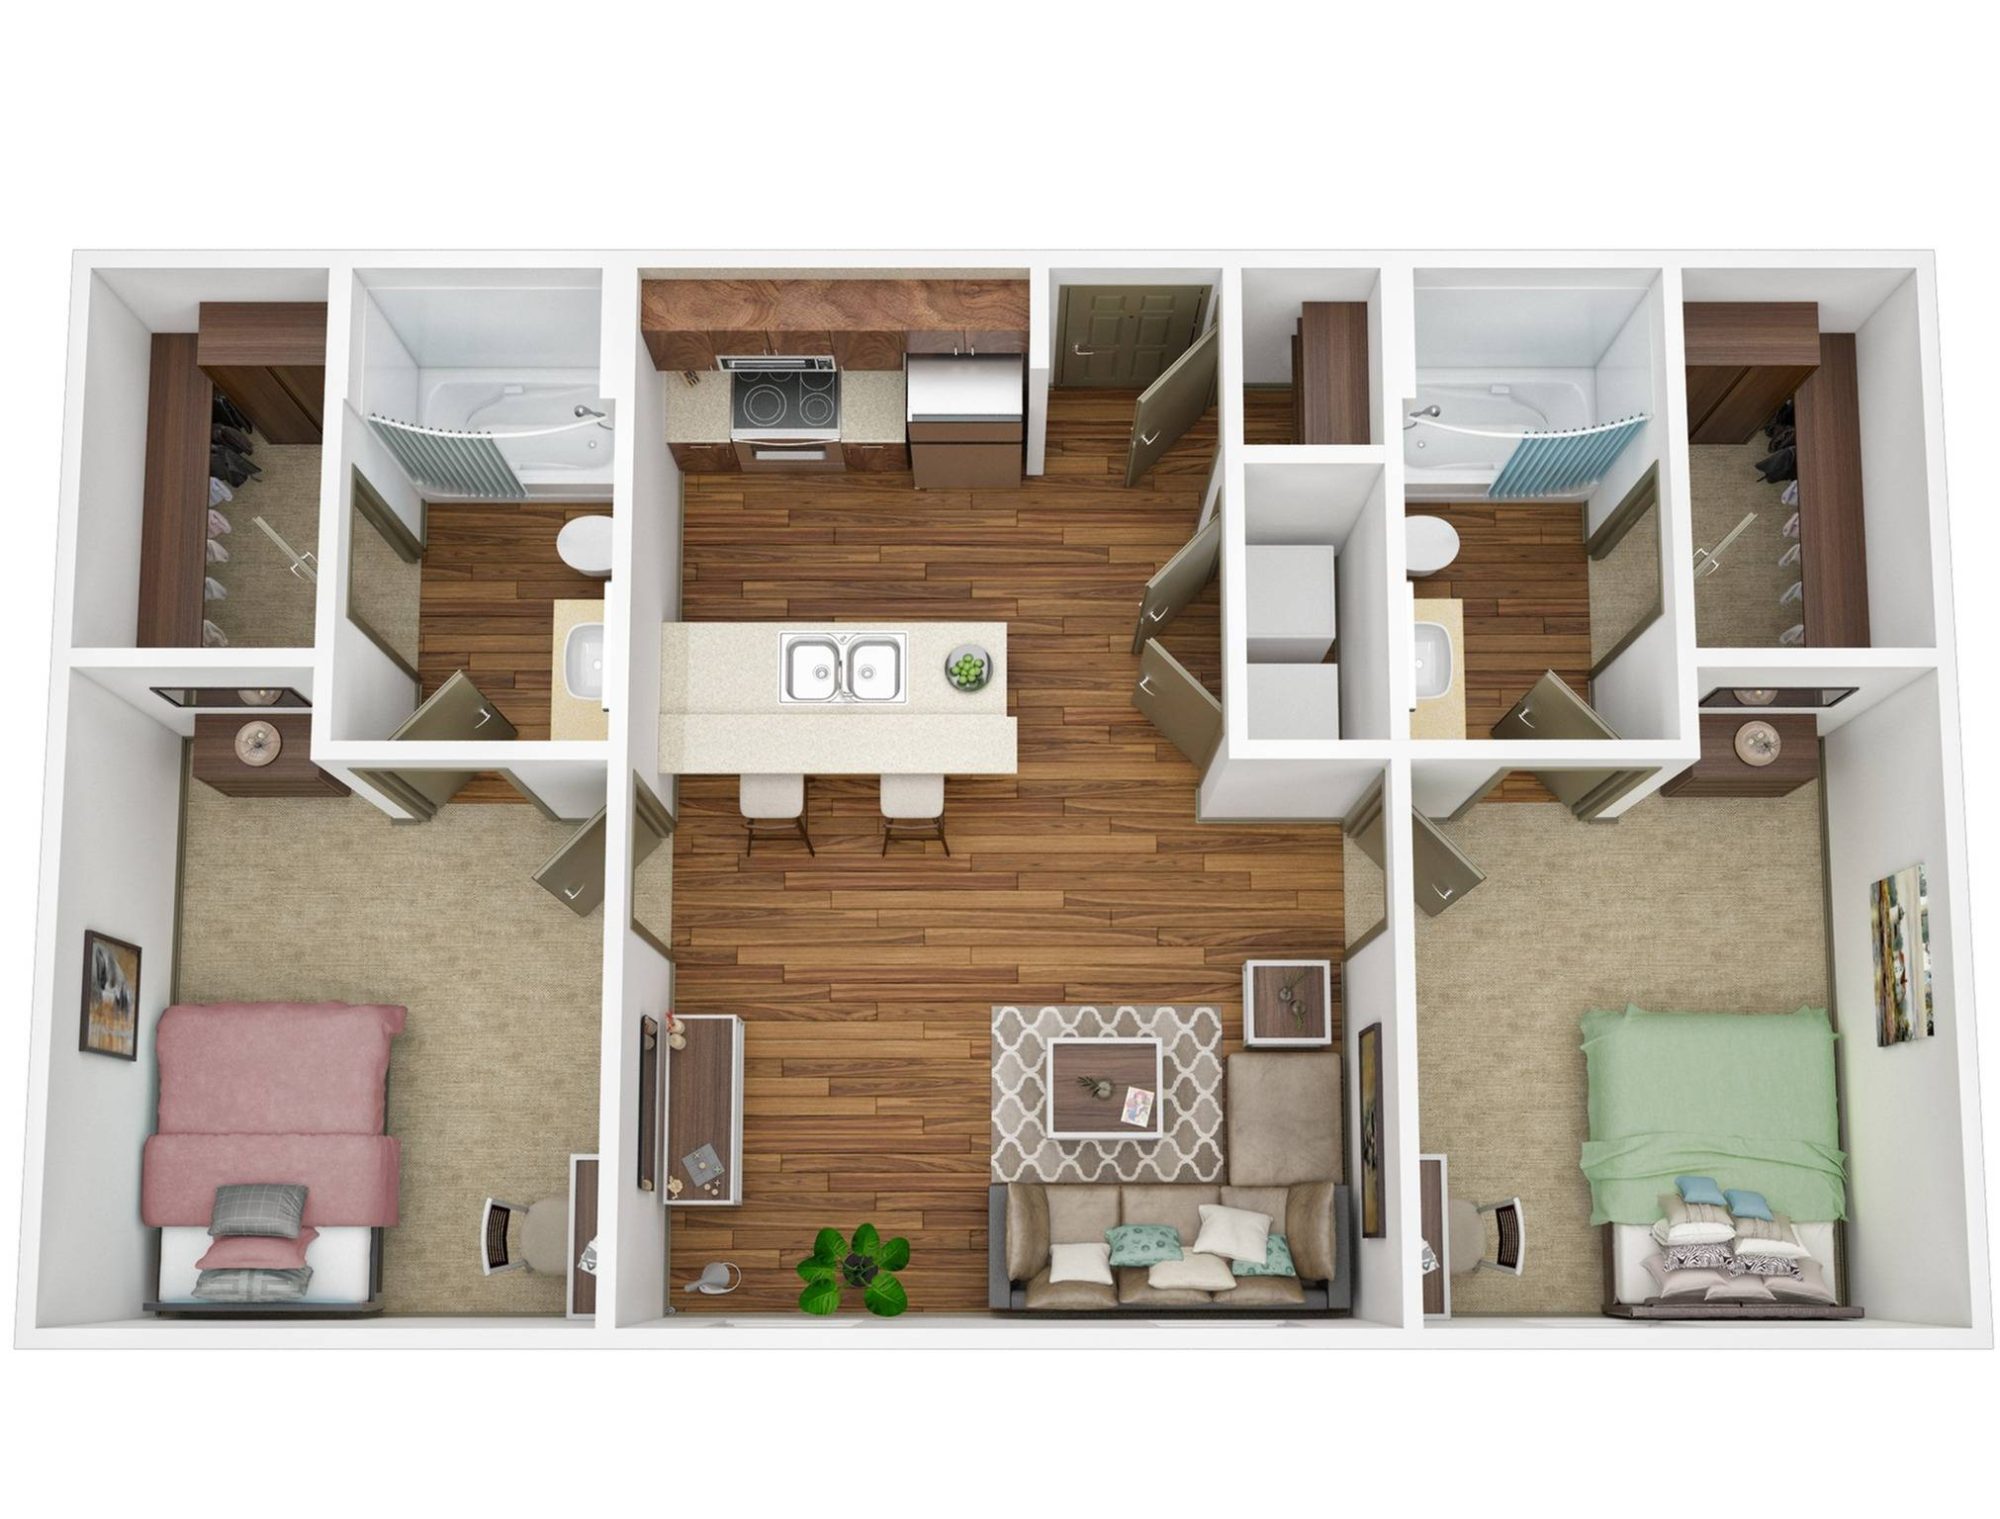 A 3D image of the 2BR/2BA – Silver floorplan, a 912 squarefoot, 2 bed / 2 bath unit